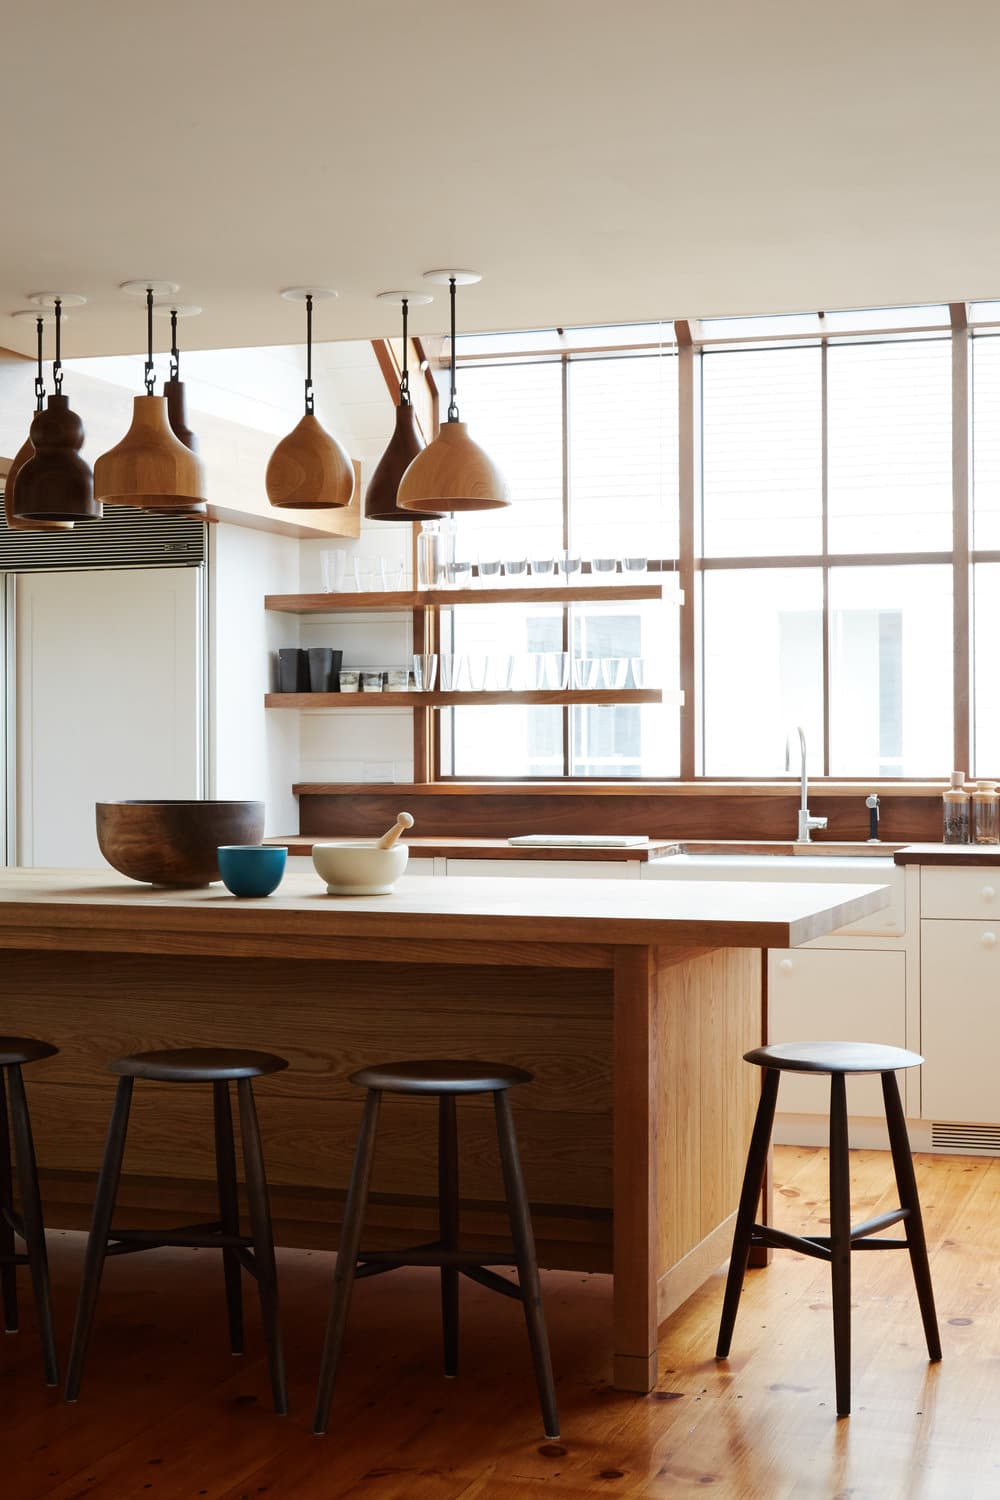 collected wood pendants over a wood island in the kitchen | modern shaker beach house tour on coco kelley